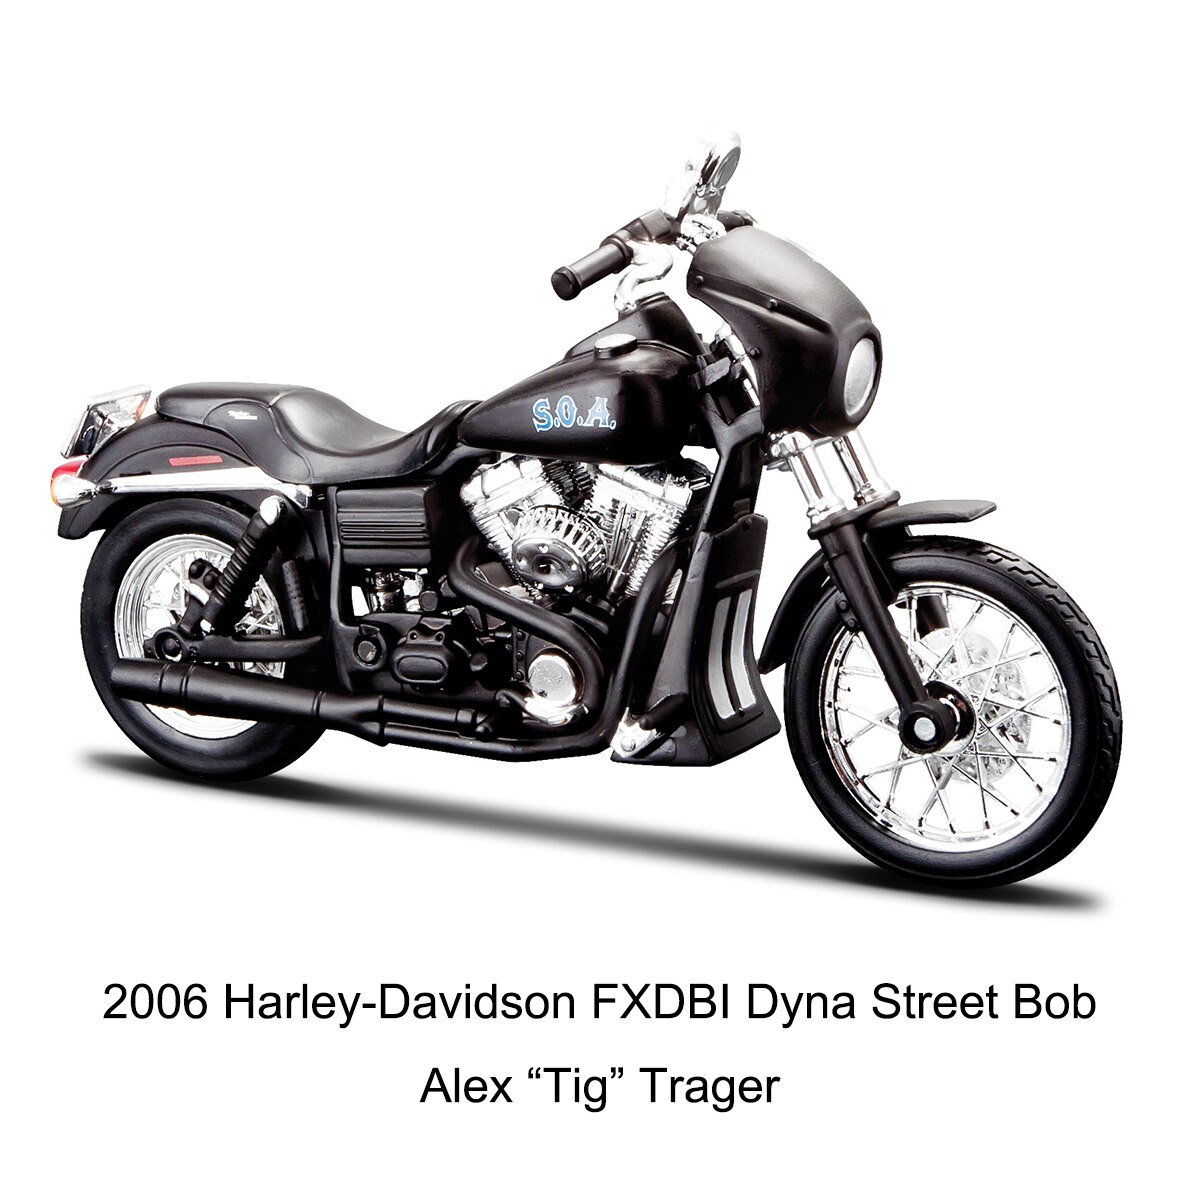 Maisto 1:18 Harley-Davidson Sons Of Anarchy Die Cast Vehicles Collectible Hobbies Motorcycle Model Toys alx